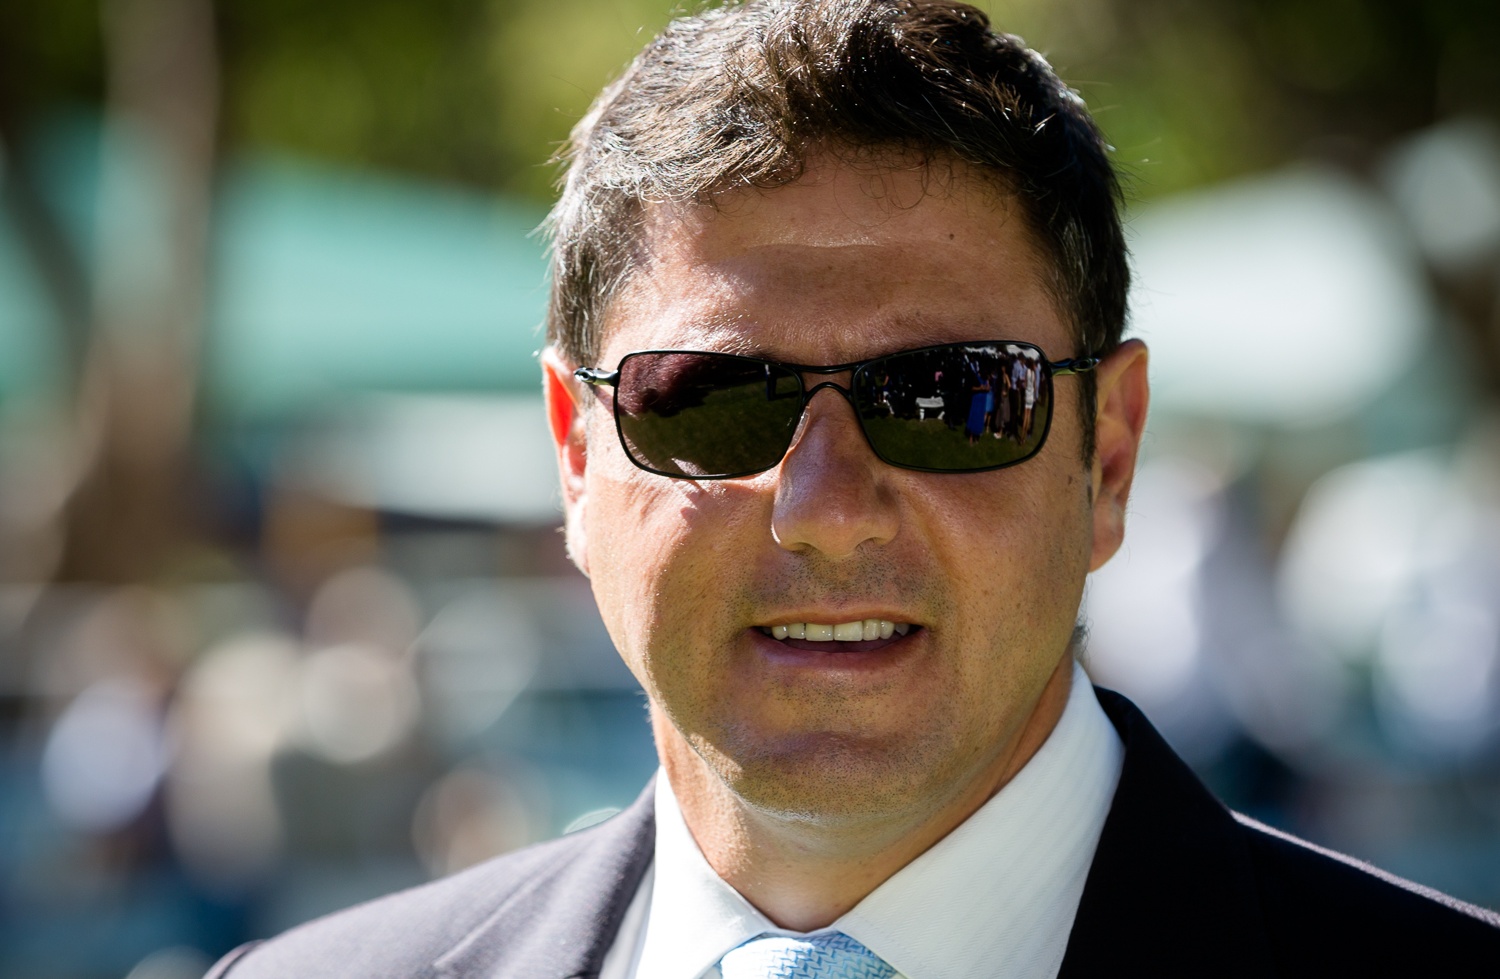 South African horse racing trainer Sean Tarry